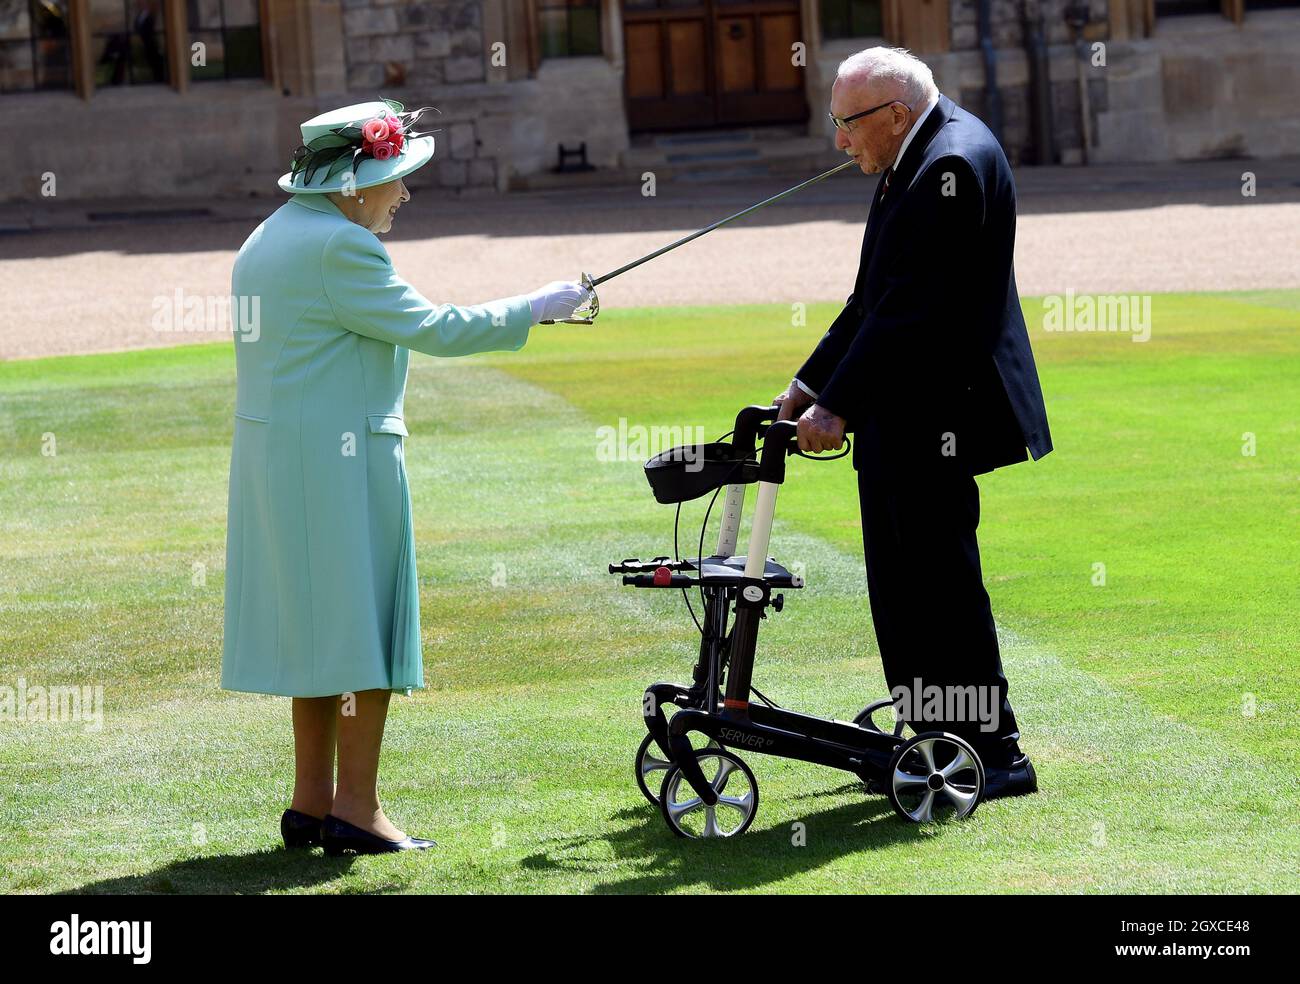 Queen Elizabeth II (using the sword that belonged to her father, King George VI) confers the Honour of Knighthood on 100 year old Captain Sir Thomas Moore before presenting him with the insignia of Knight Bachelor during an investiture ceremony at Windsor Castle on July 17, 2020. Captain Tom Moore raised over £32 million for the NHS during the coronavirus pandemic. Stock Photo